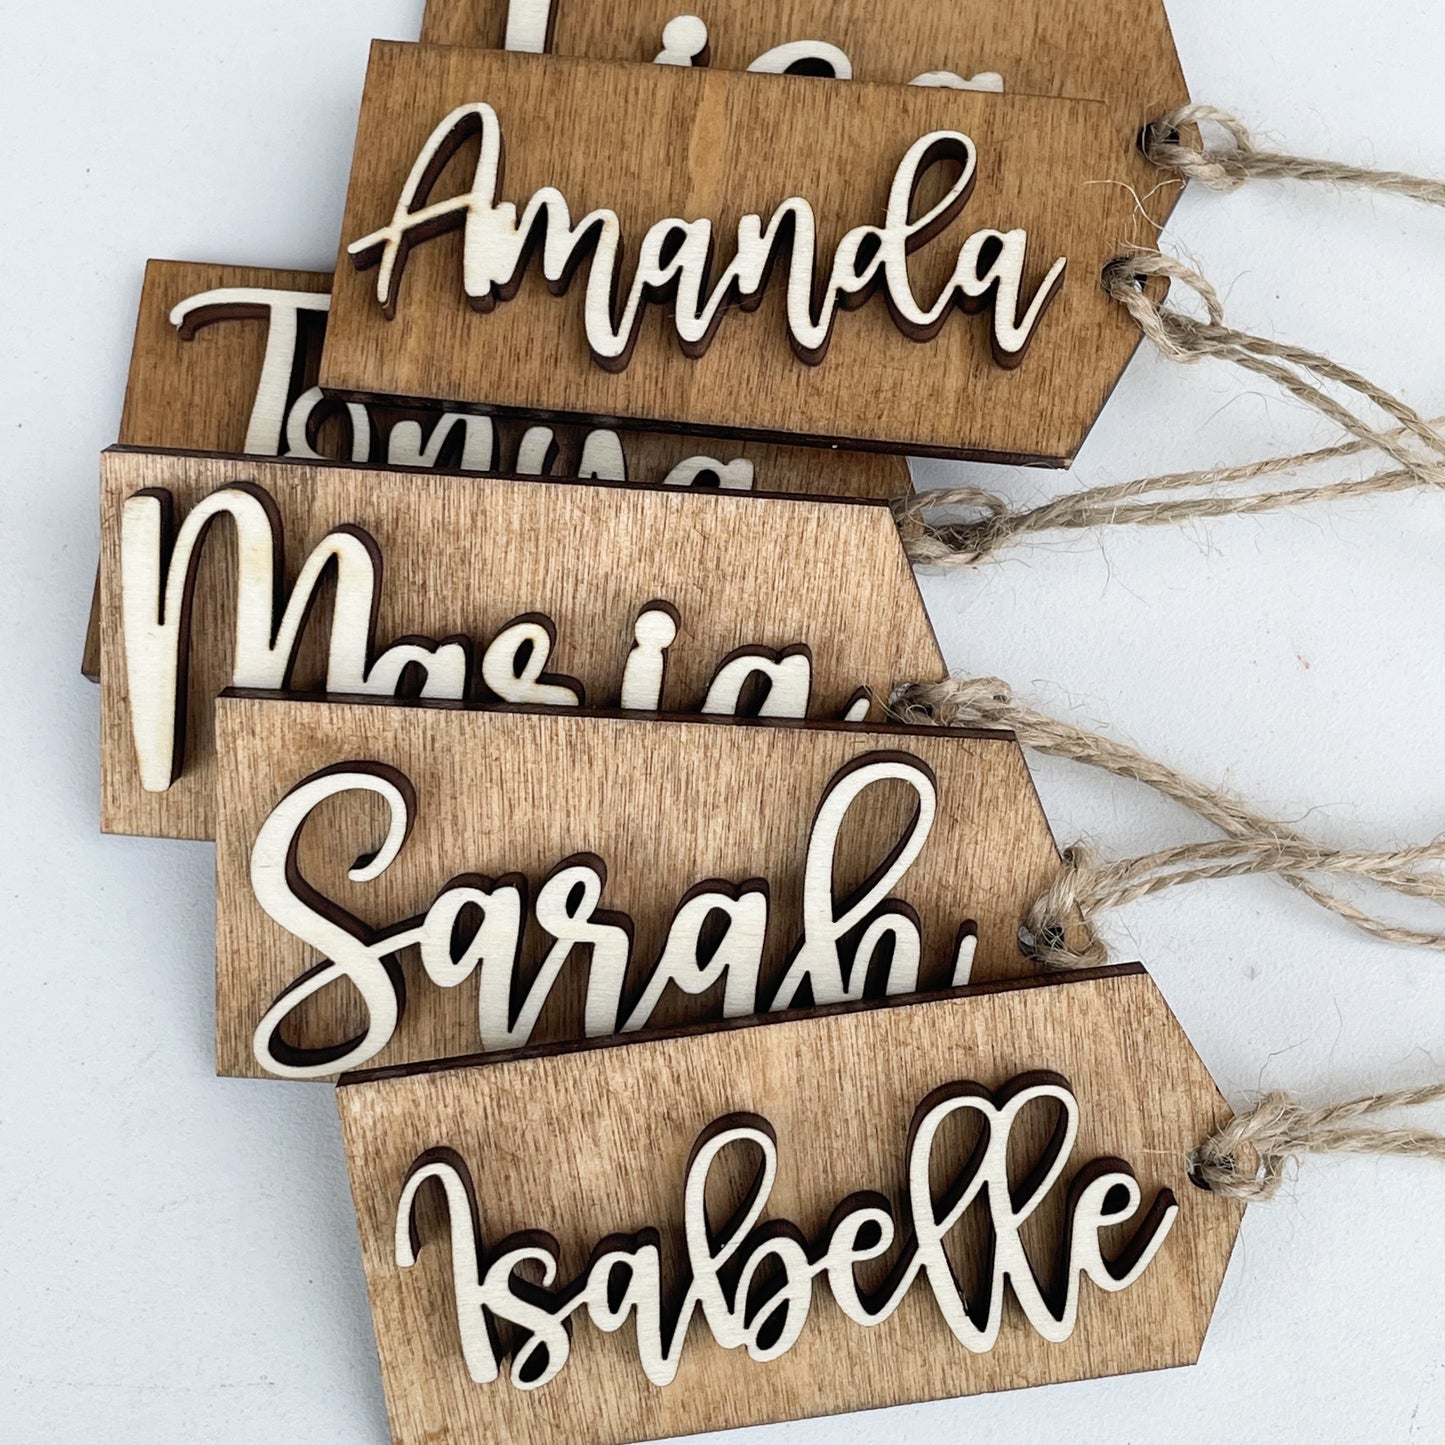 Stocking Tags/Gift Tags